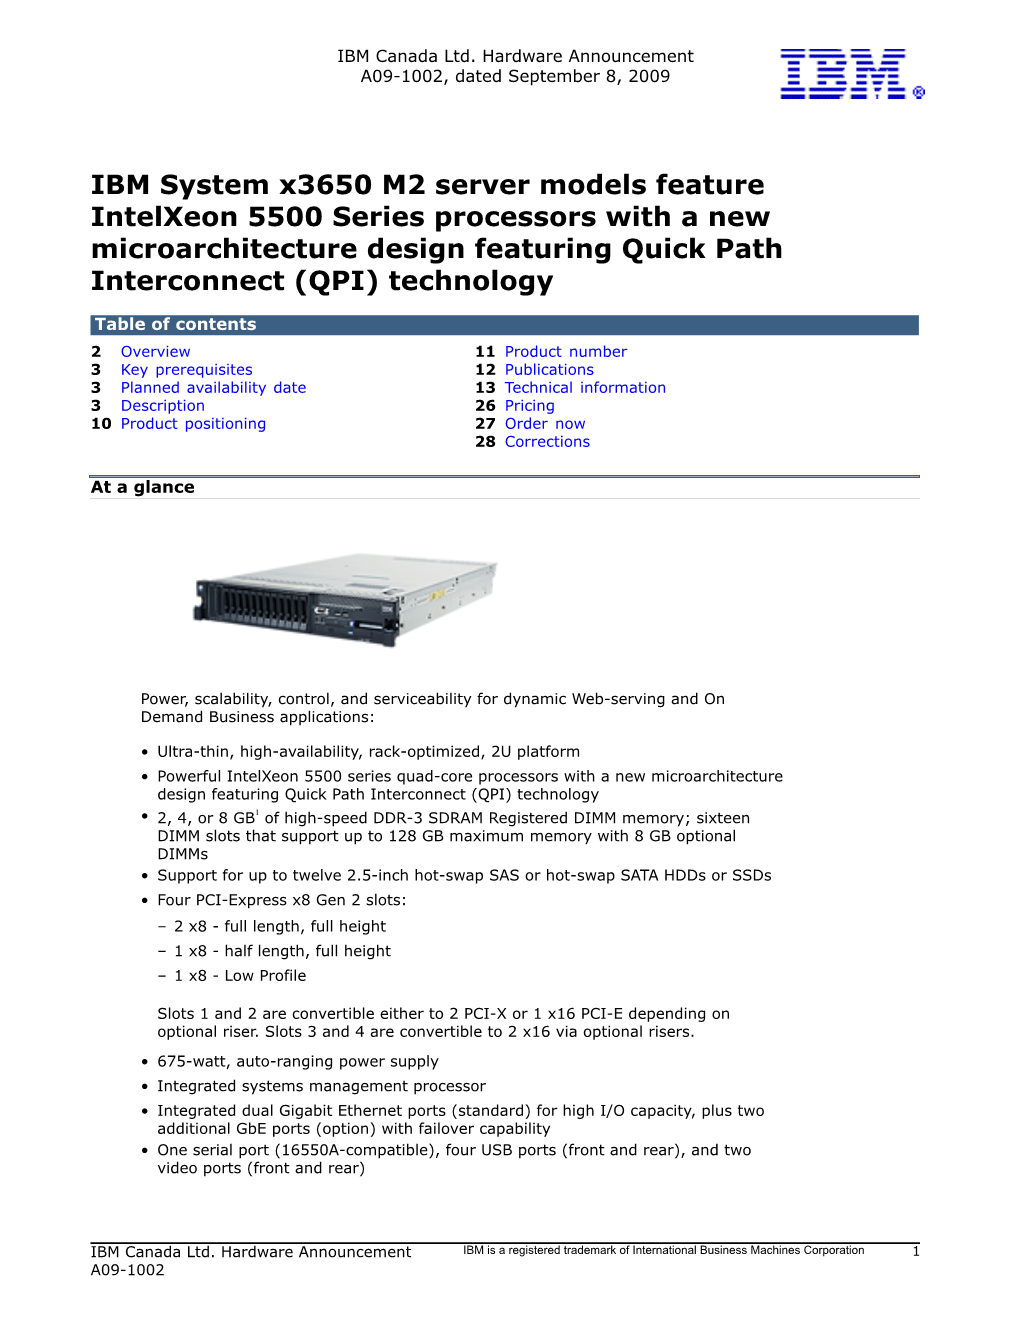 IBM System X3650 M2 Server Models Feature Intelxeon 5500 Series Processors with a New Microarchitecture Design Featuring Quick Path Interconnect (QPI) Technology